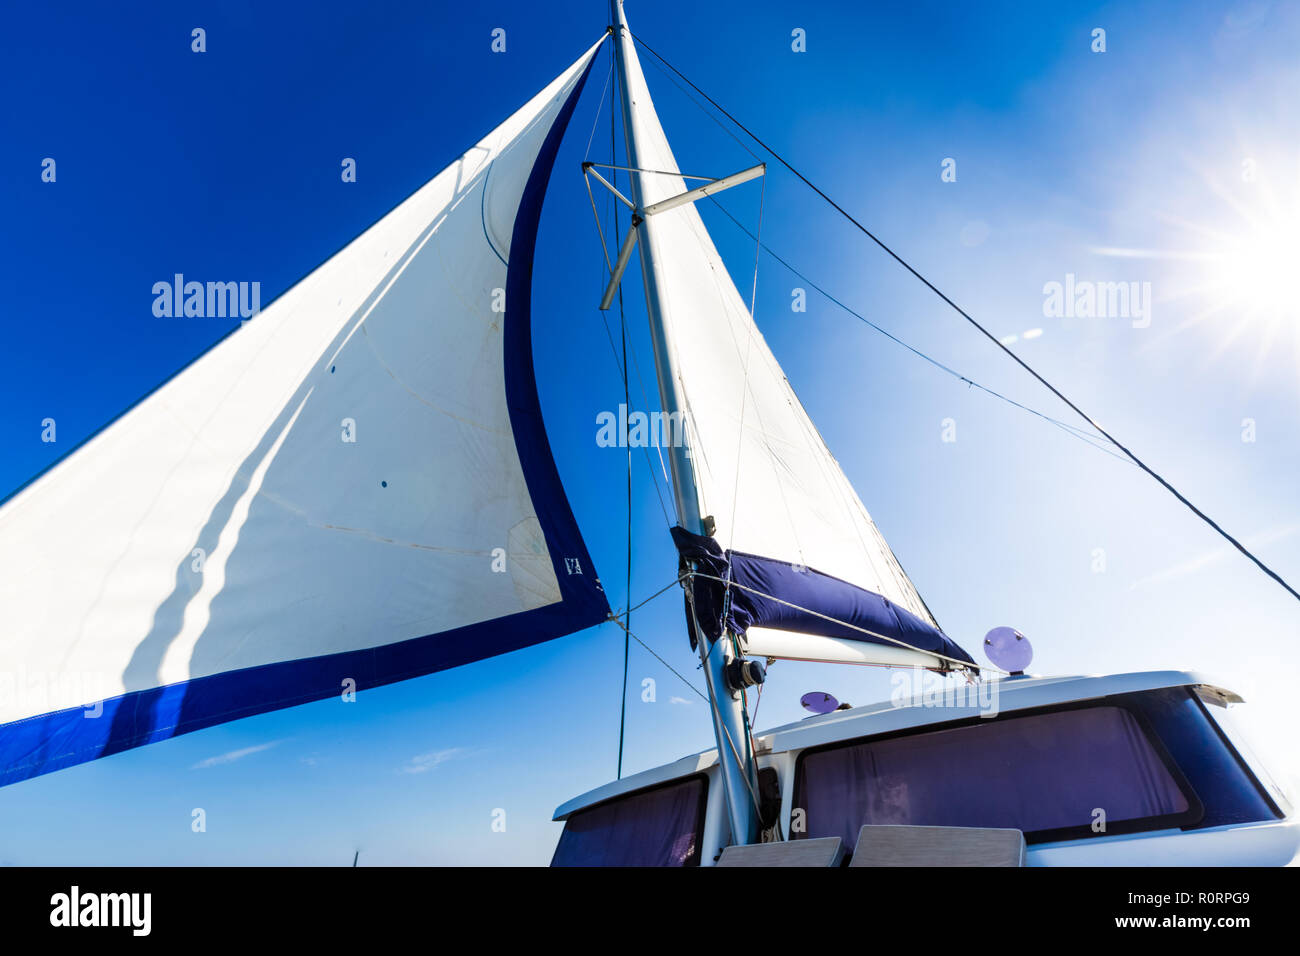 White sails of a sailing yacht in the wind. Recreational water sport Stock Photo